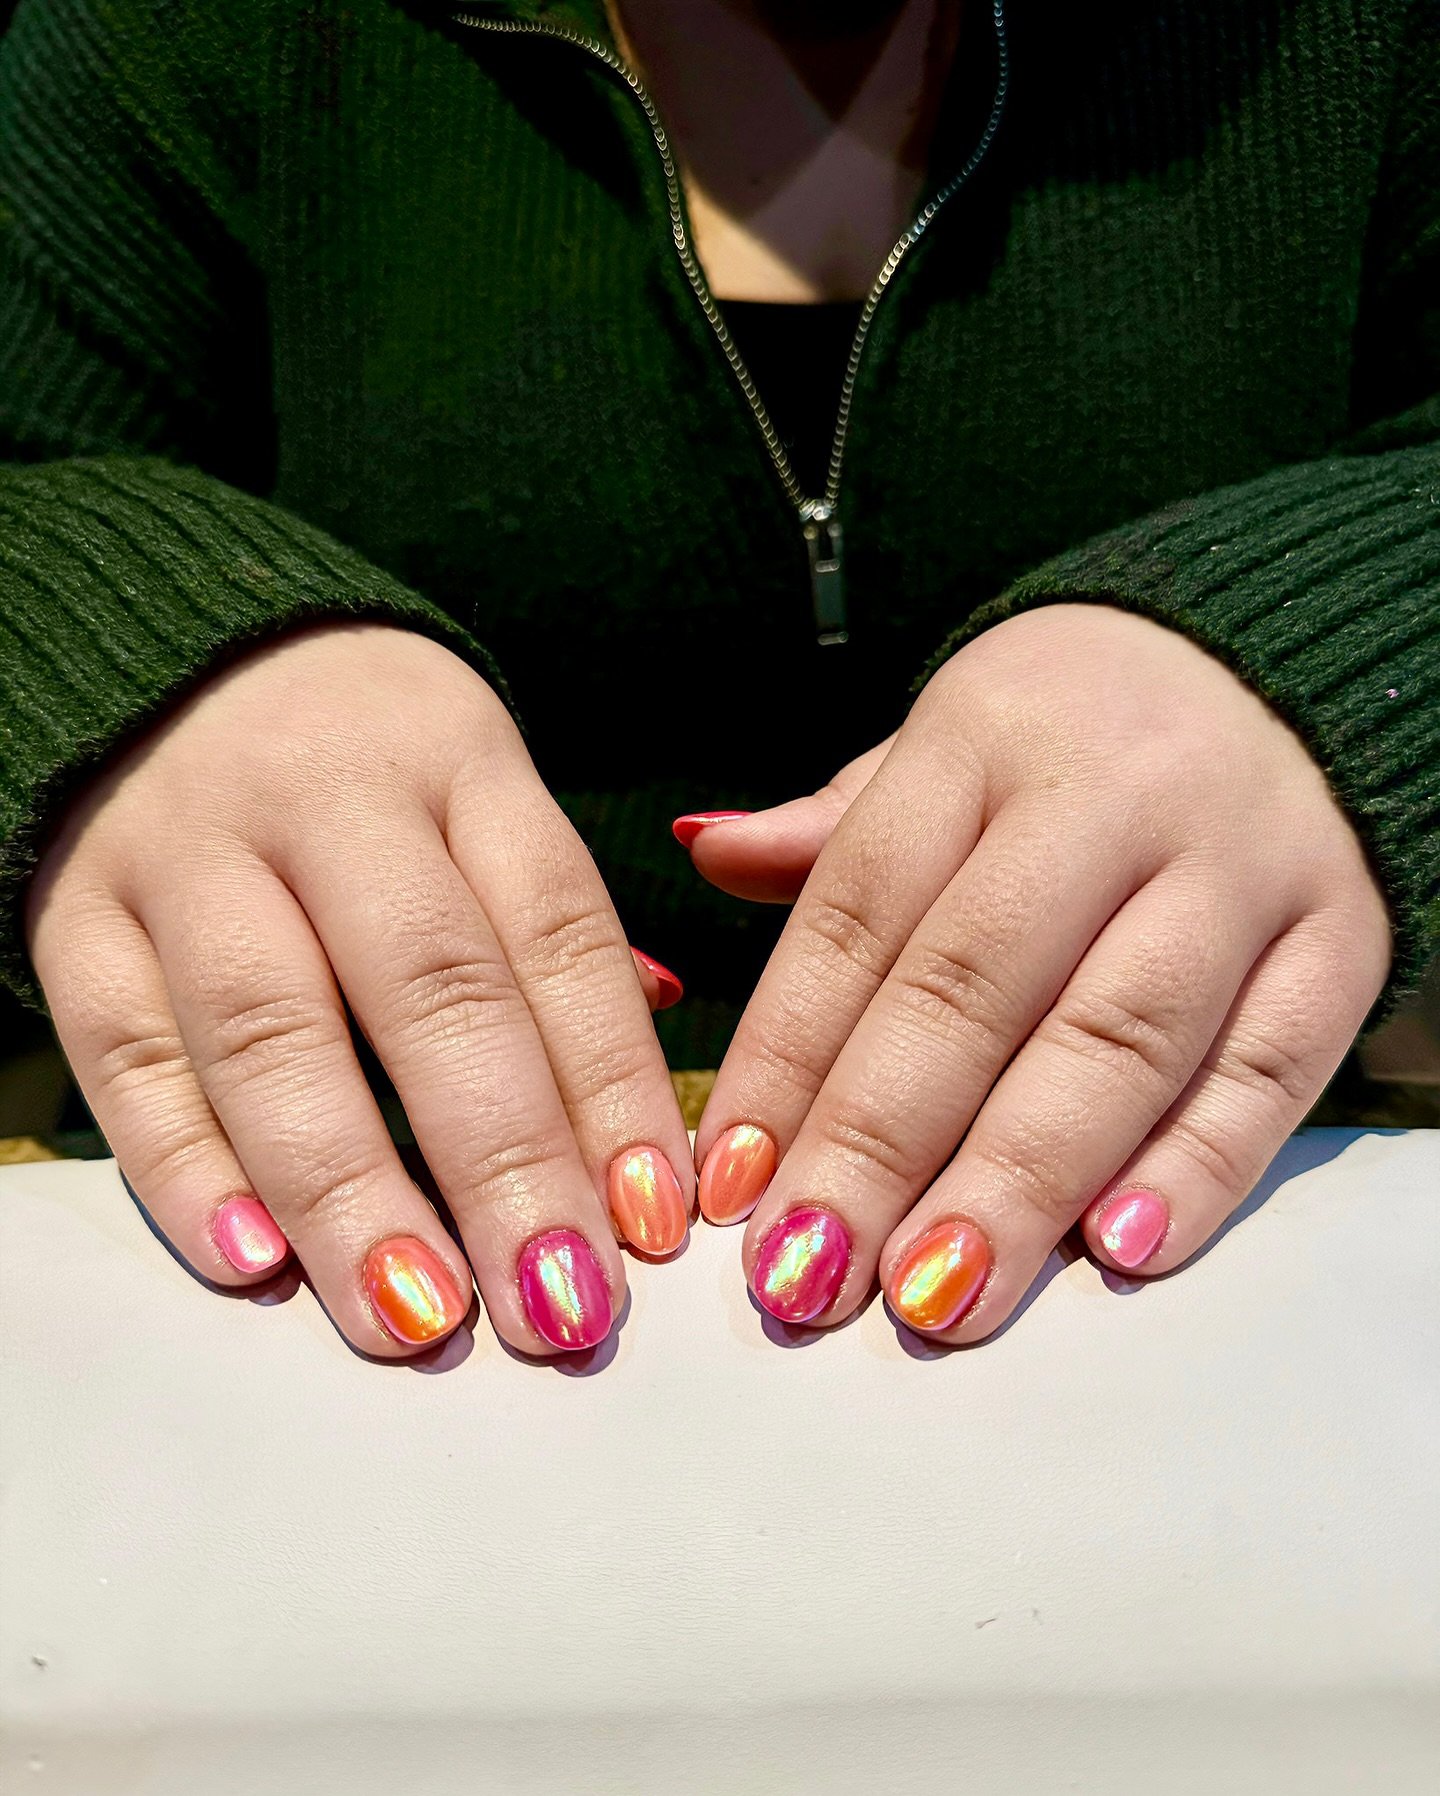 Orange you glad for a pop of color? 🍊💖 Dylan&rsquo;s vibrant dip powder set, finished with a chic chrome touch, is sure to turn heads and brighten spirits. Step into summer vibes at Bliss Nails &amp; Spa. 

#NailArt #SummerReady #ChromeDipPowder #n